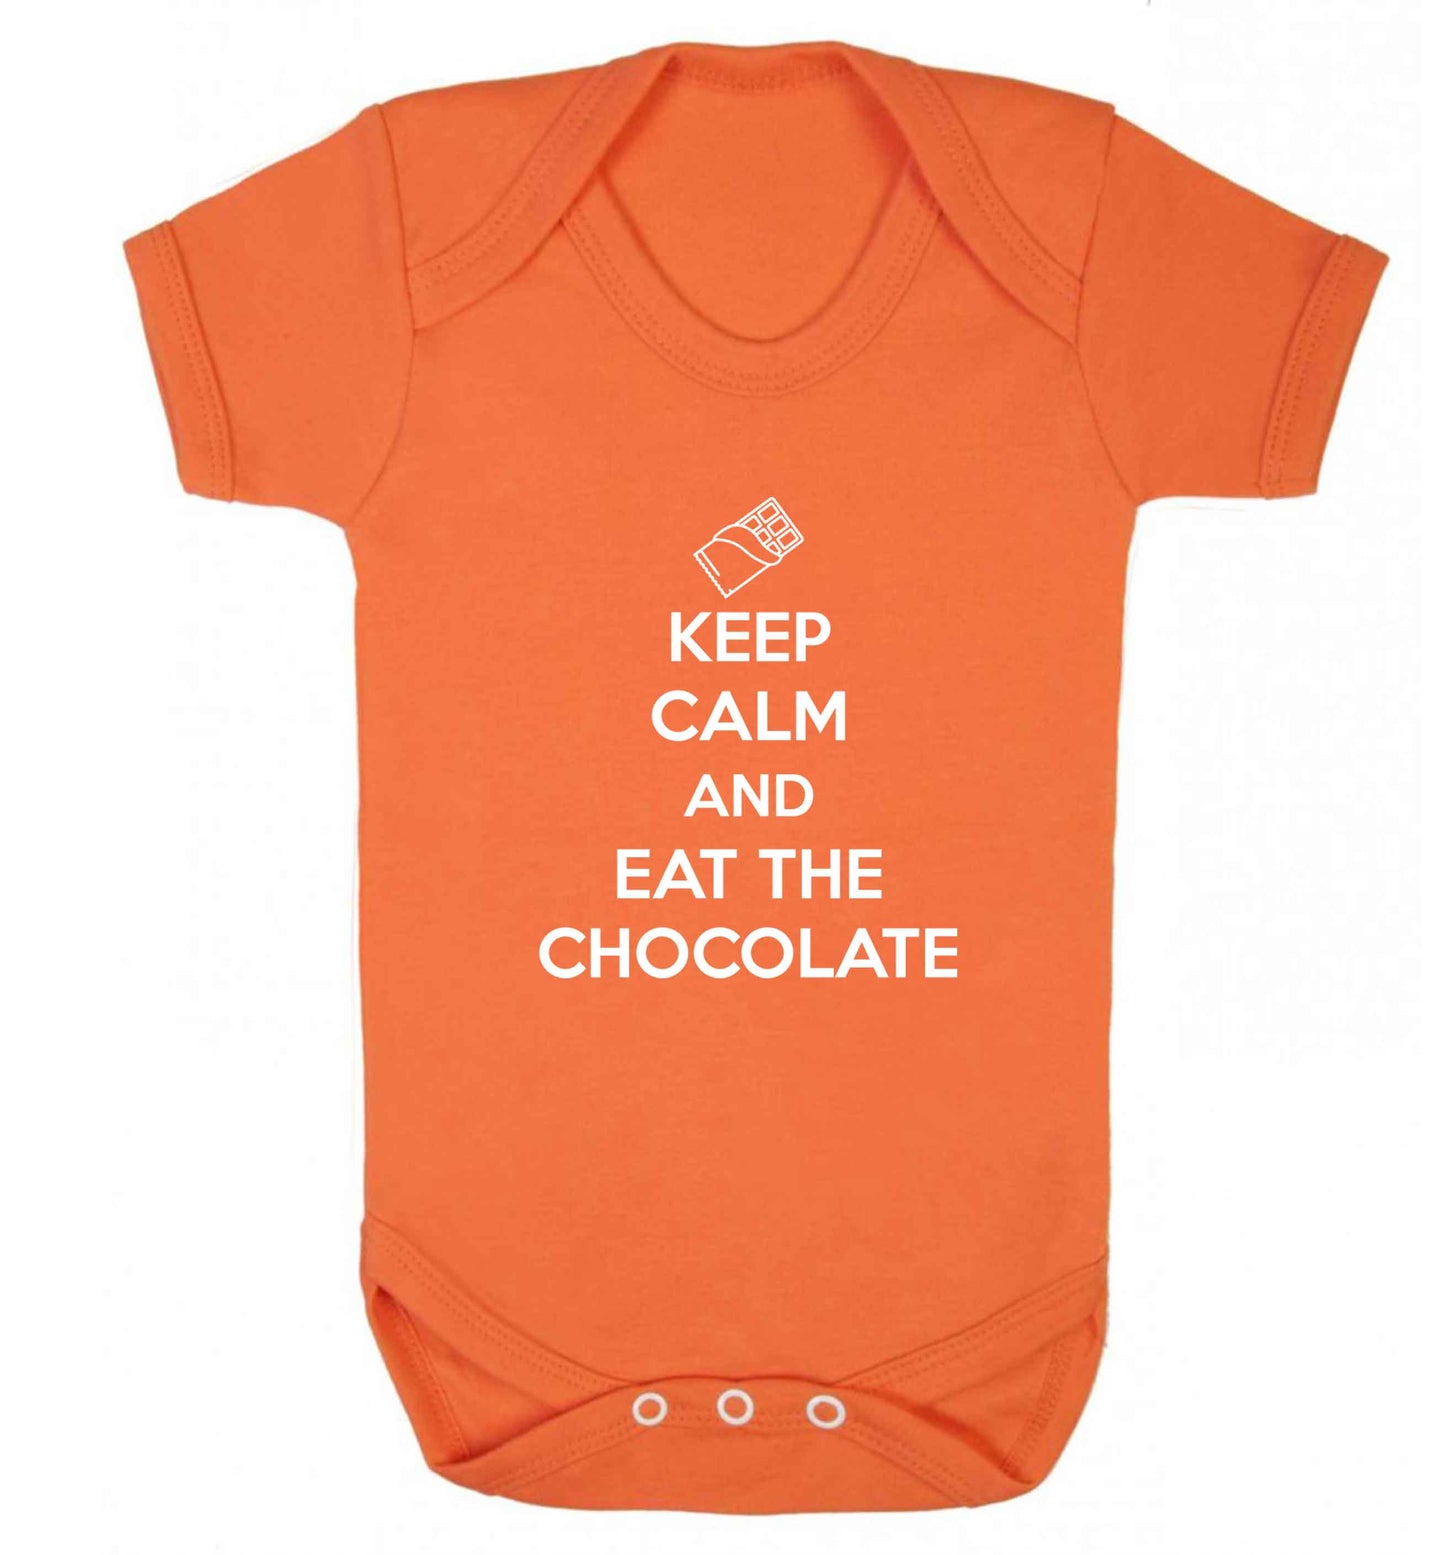 funny gift for a chocaholic! Keep calm and eat the chocolate baby vest orange 18-24 months